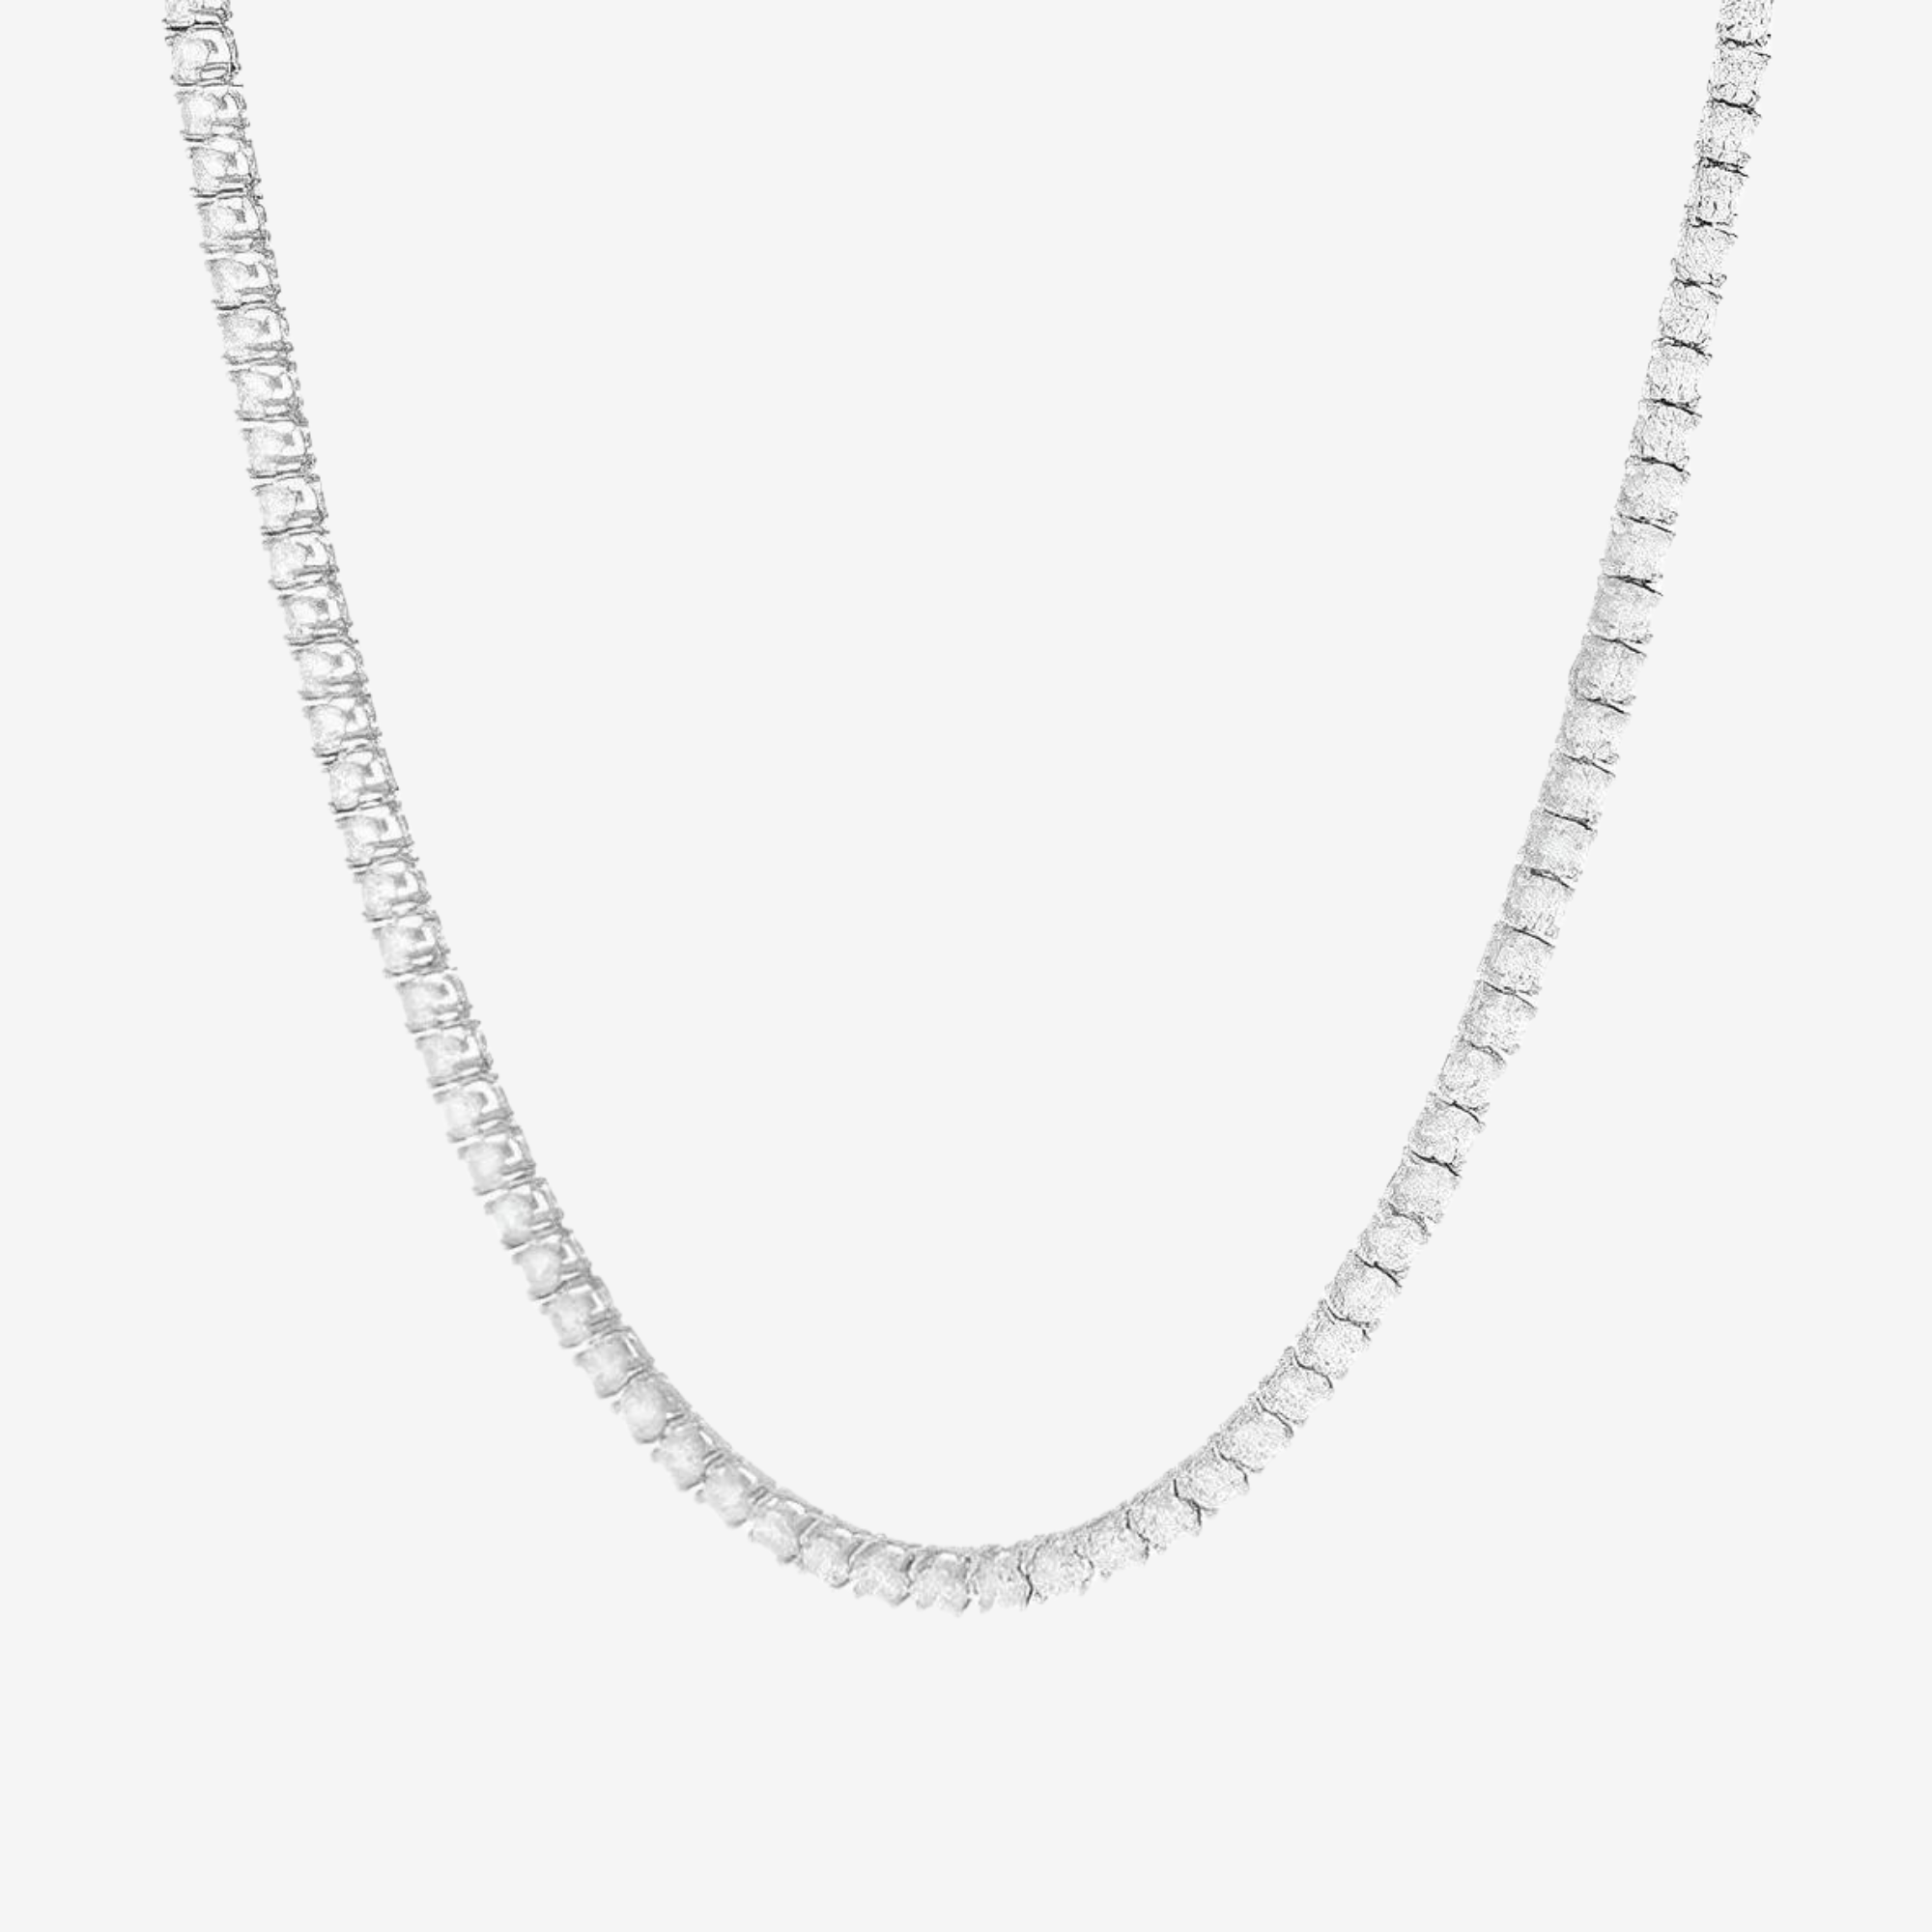 Hillenic Silver Tennis Chain hanging on the grey background 